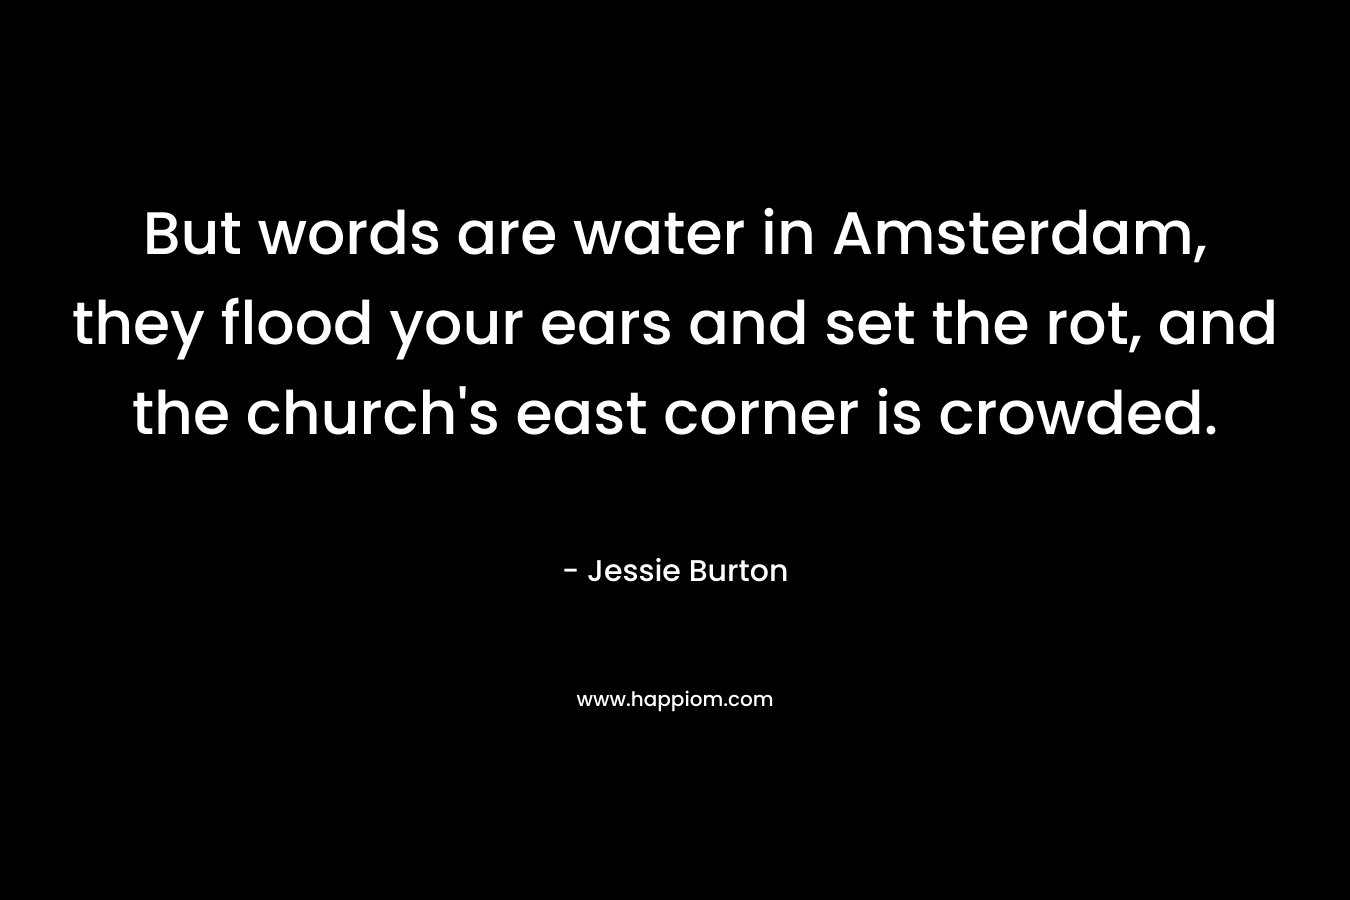 But words are water in Amsterdam, they flood your ears and set the rot, and the church’s east corner is crowded. – Jessie Burton